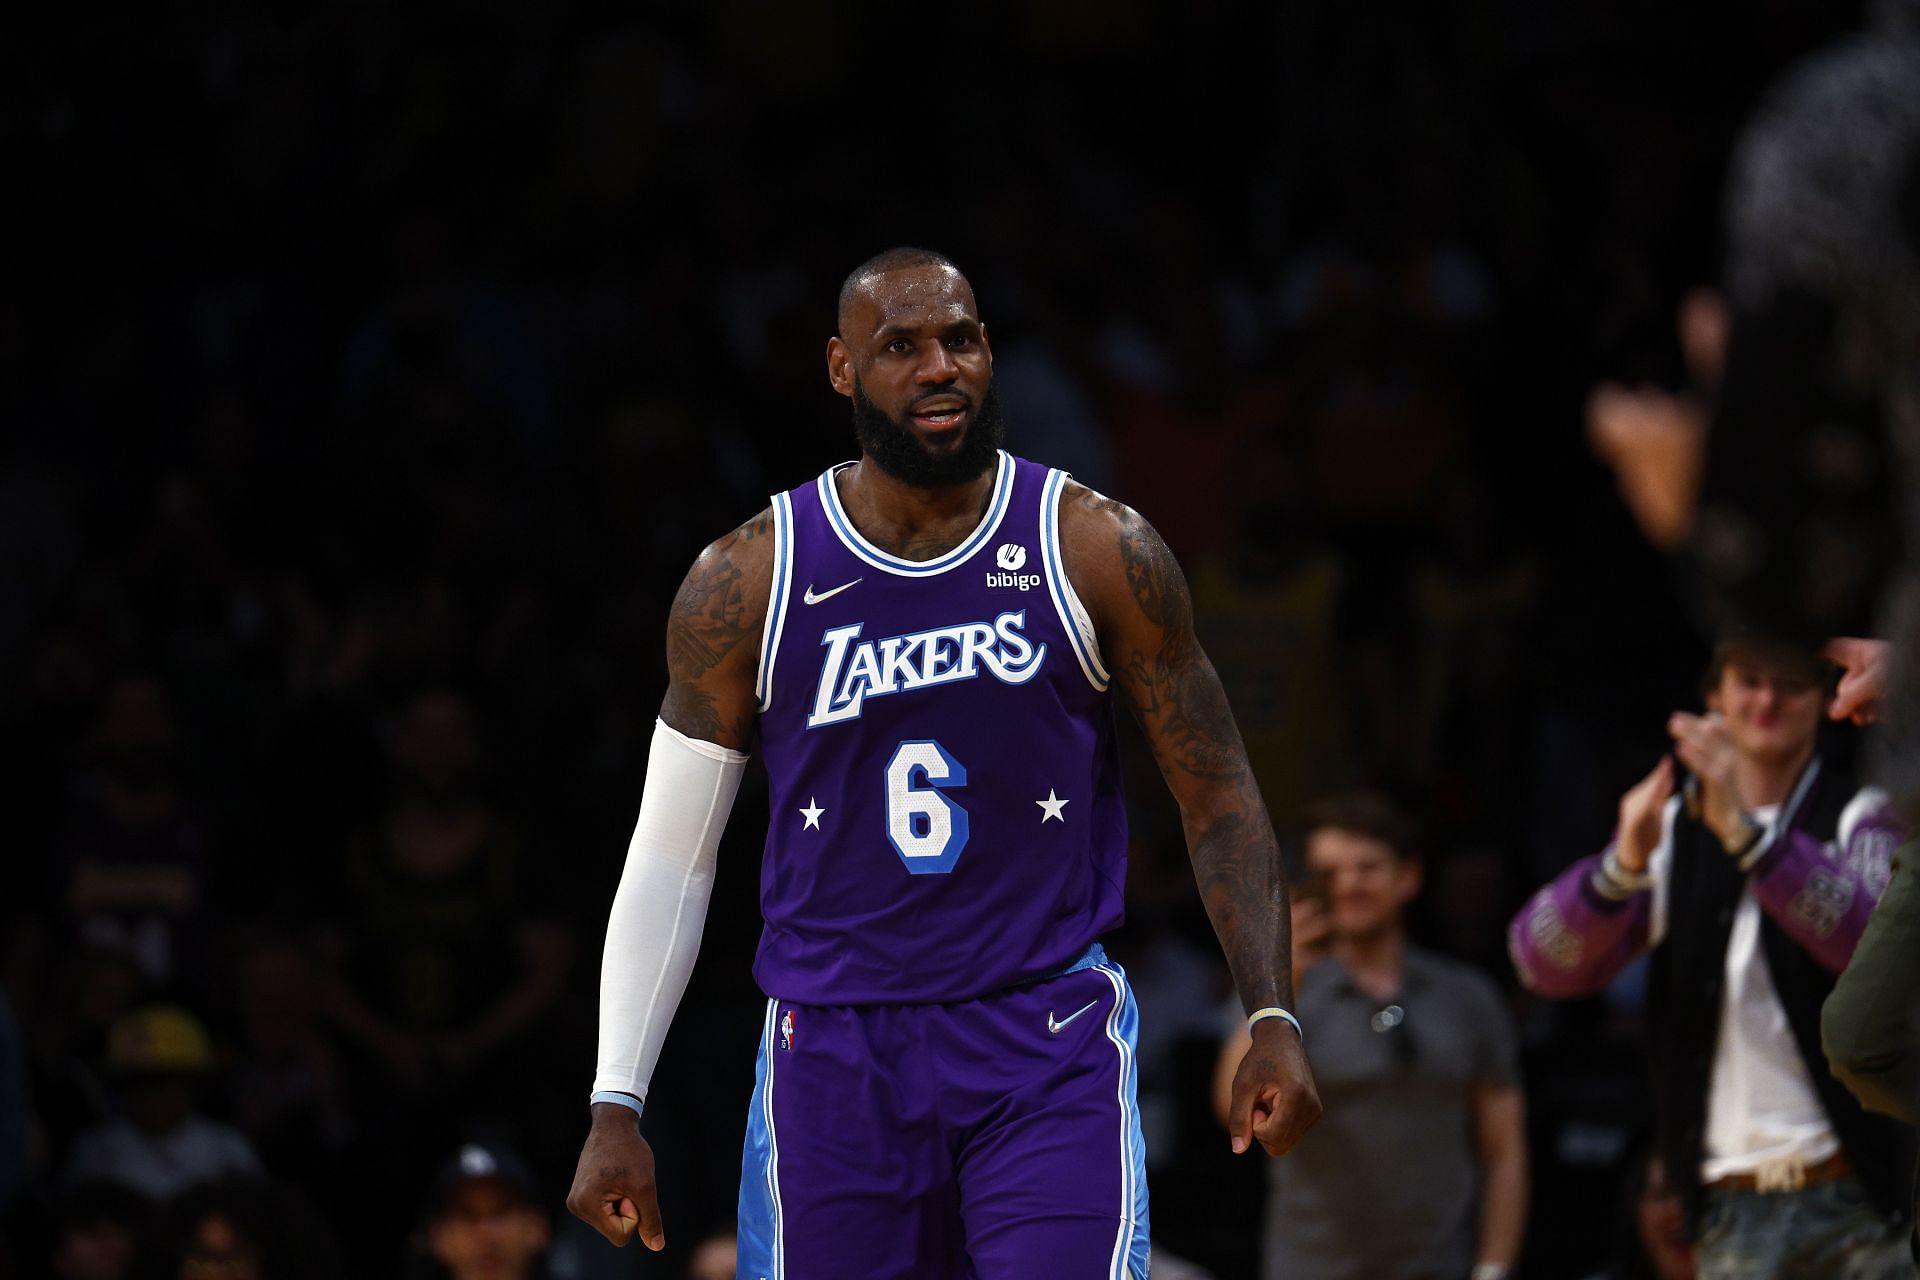 LeBron James scores 50 points for the Los Angeles Lakers in their game against the Wizards